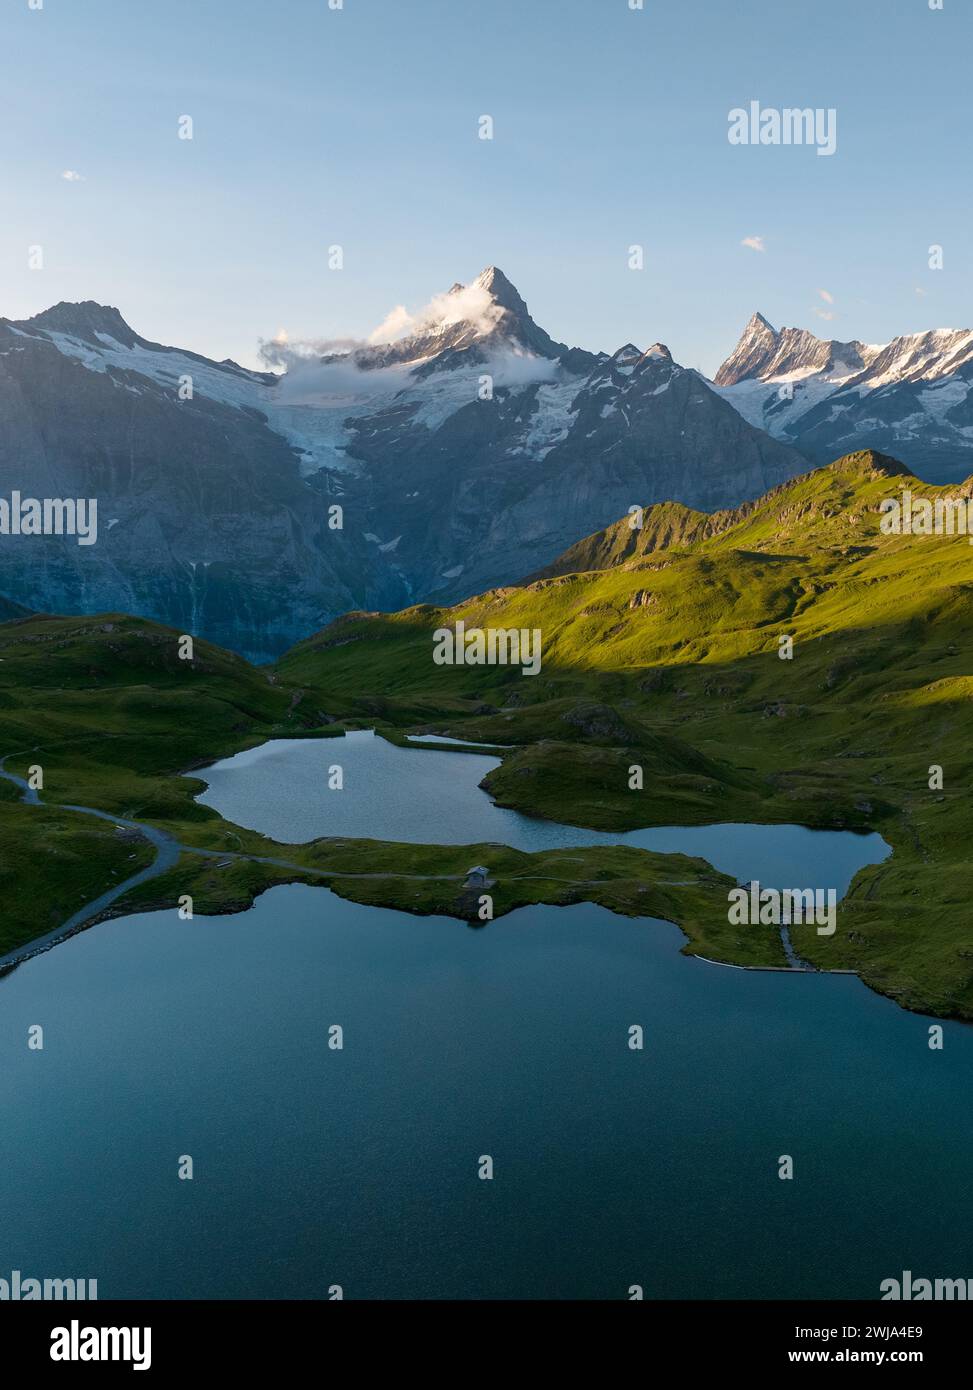 Tranquil alpine lake nestled among rolling green hills with rugged mountains in the backdrop at sunset. Stock Photo